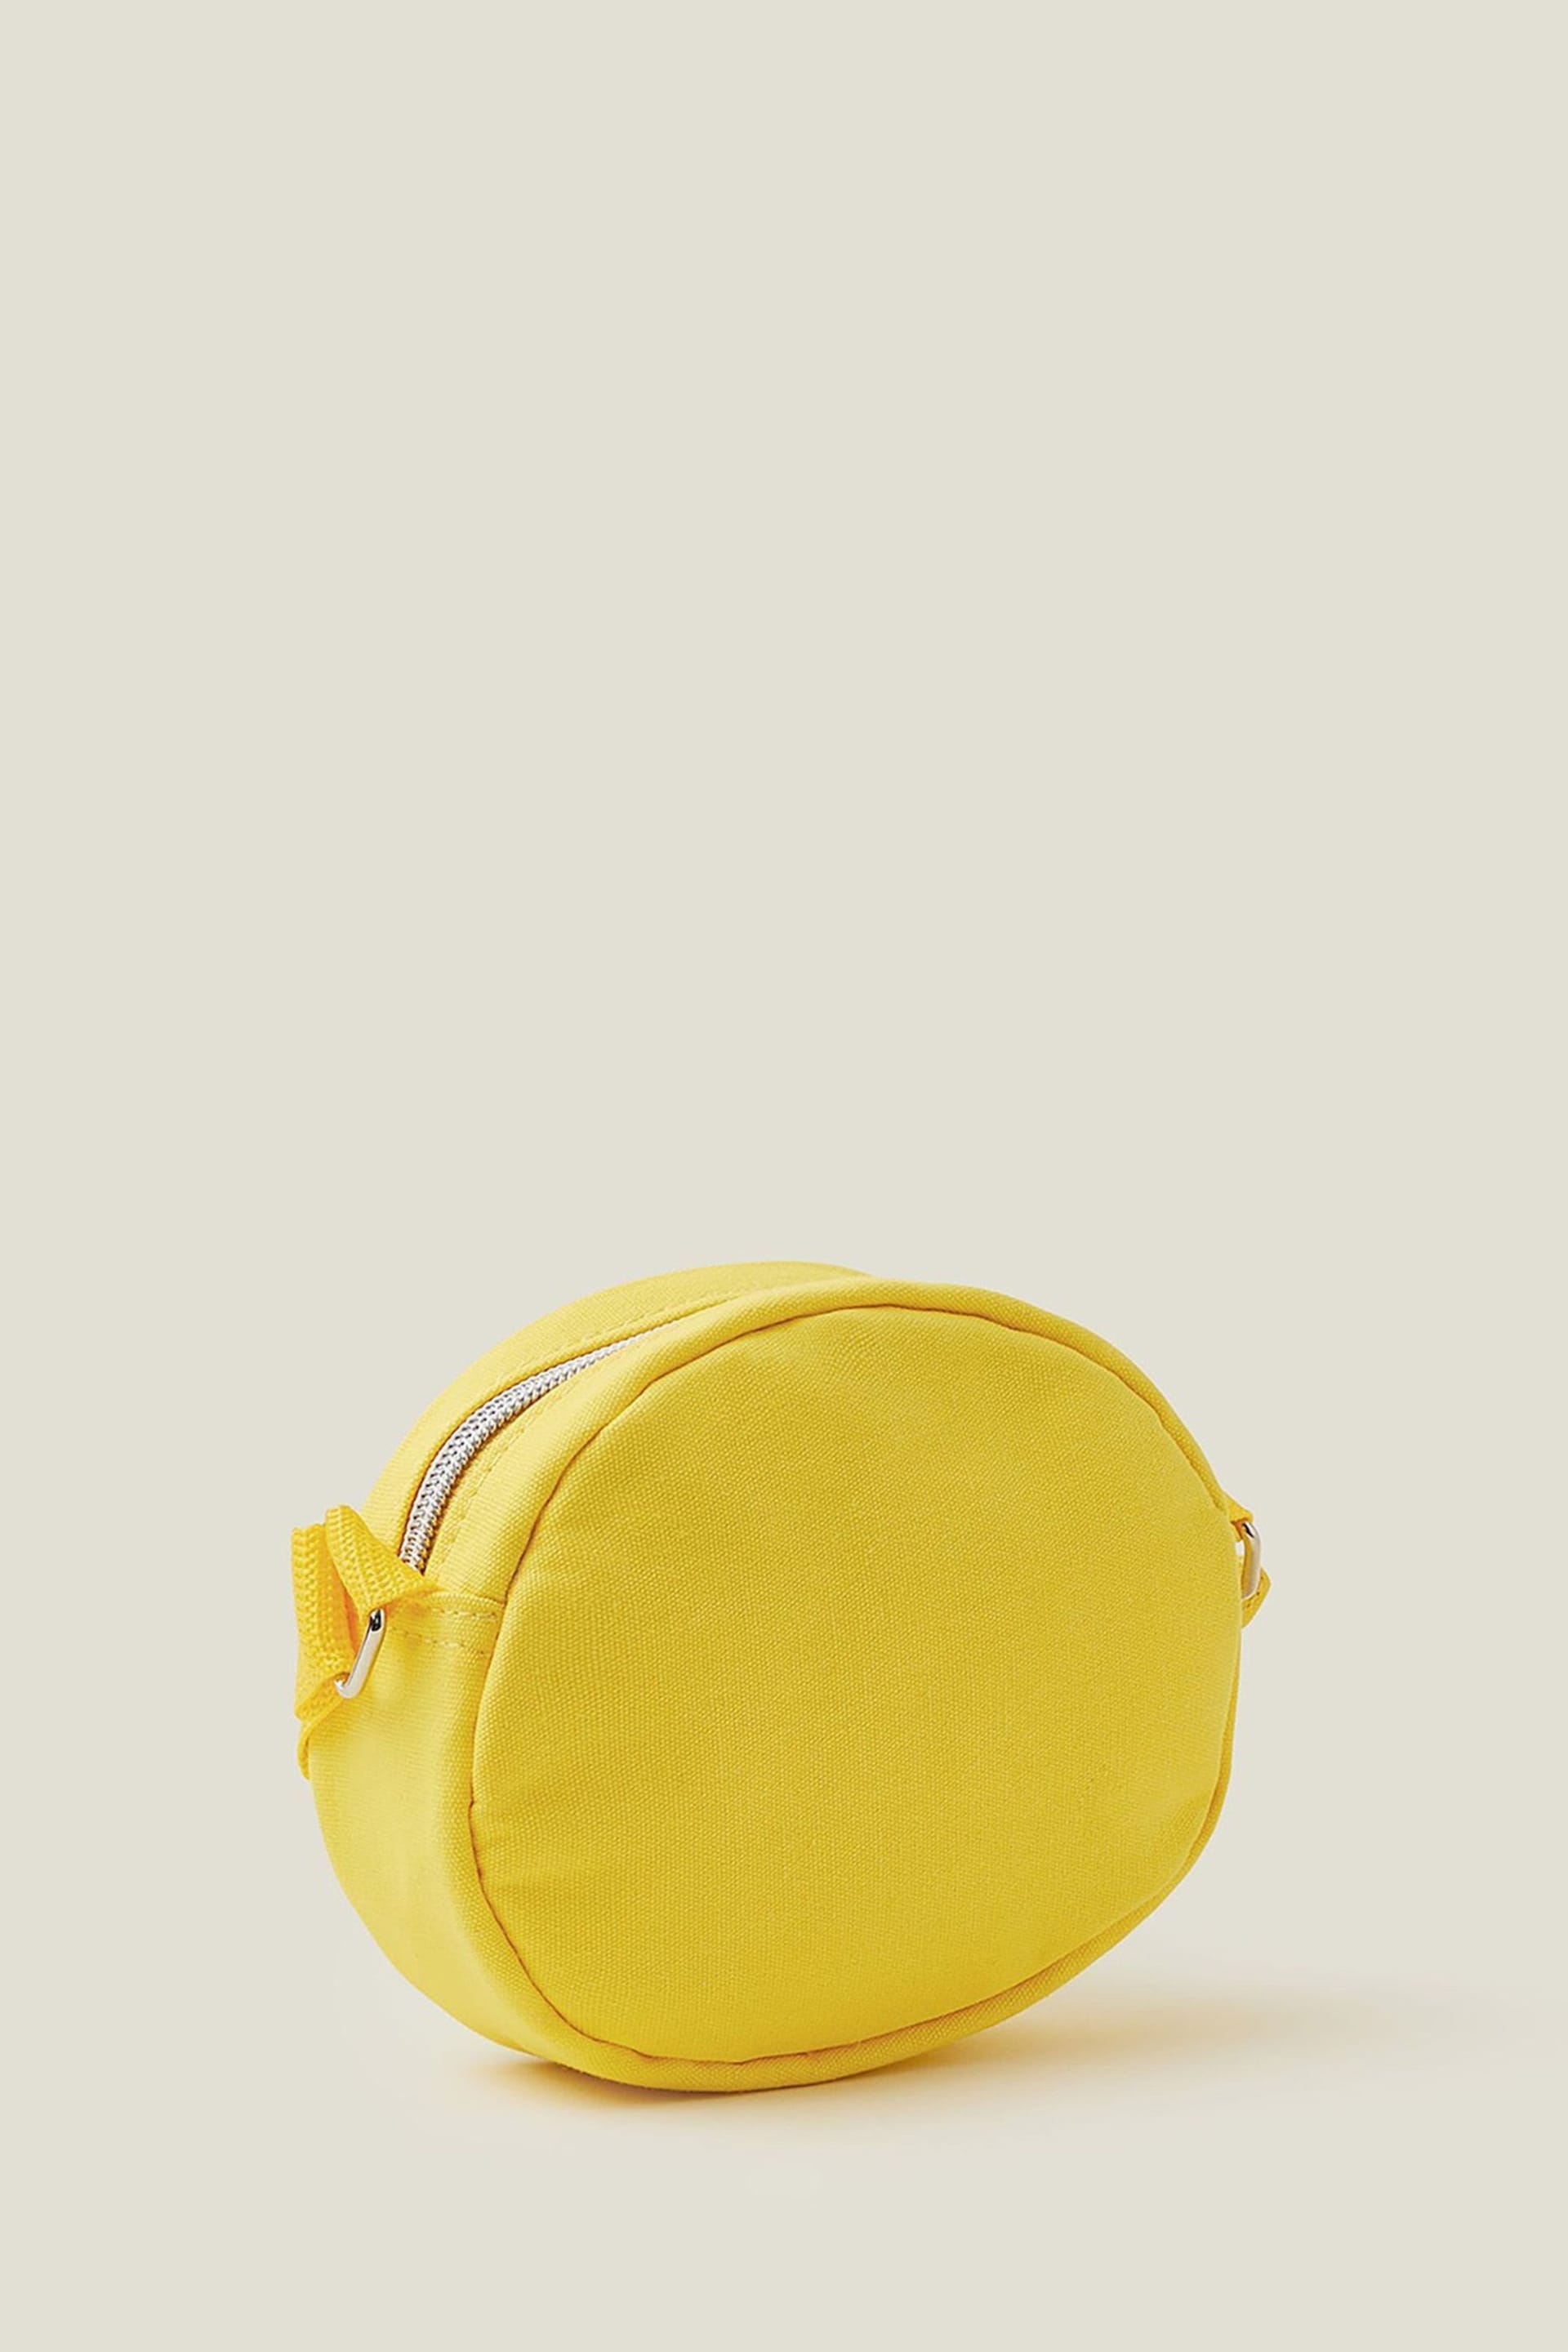 Accessorize Yellow Girls Fish Bag - Image 3 of 4